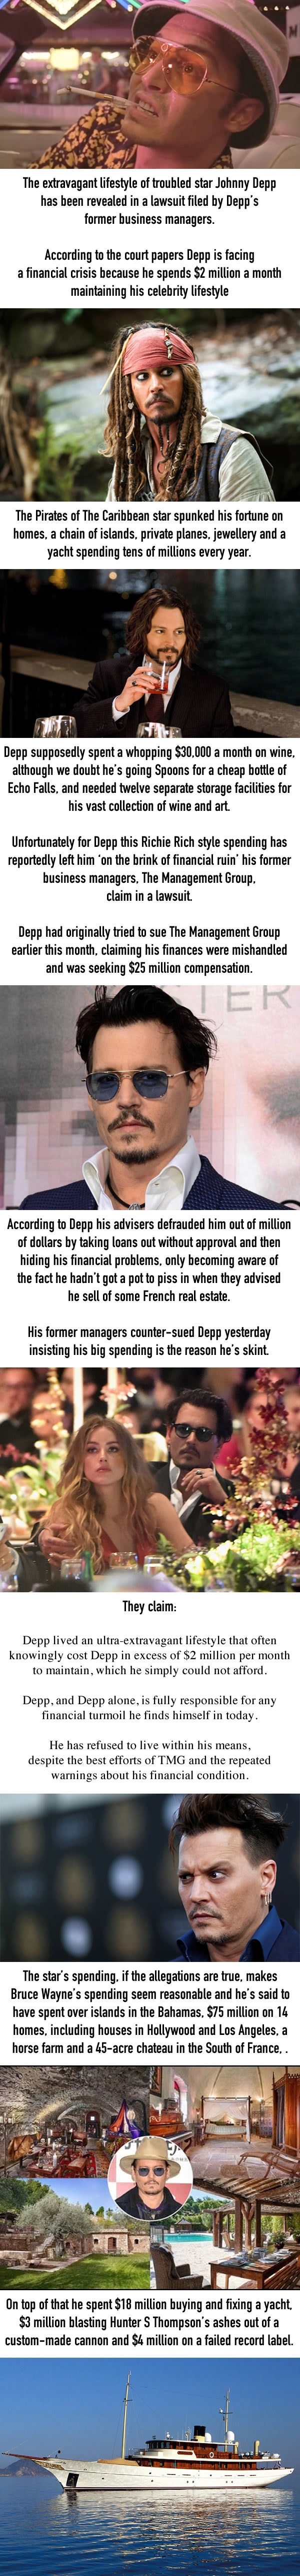 Johnny Depp apparently spends $2 million a month to live like Johnny Depp